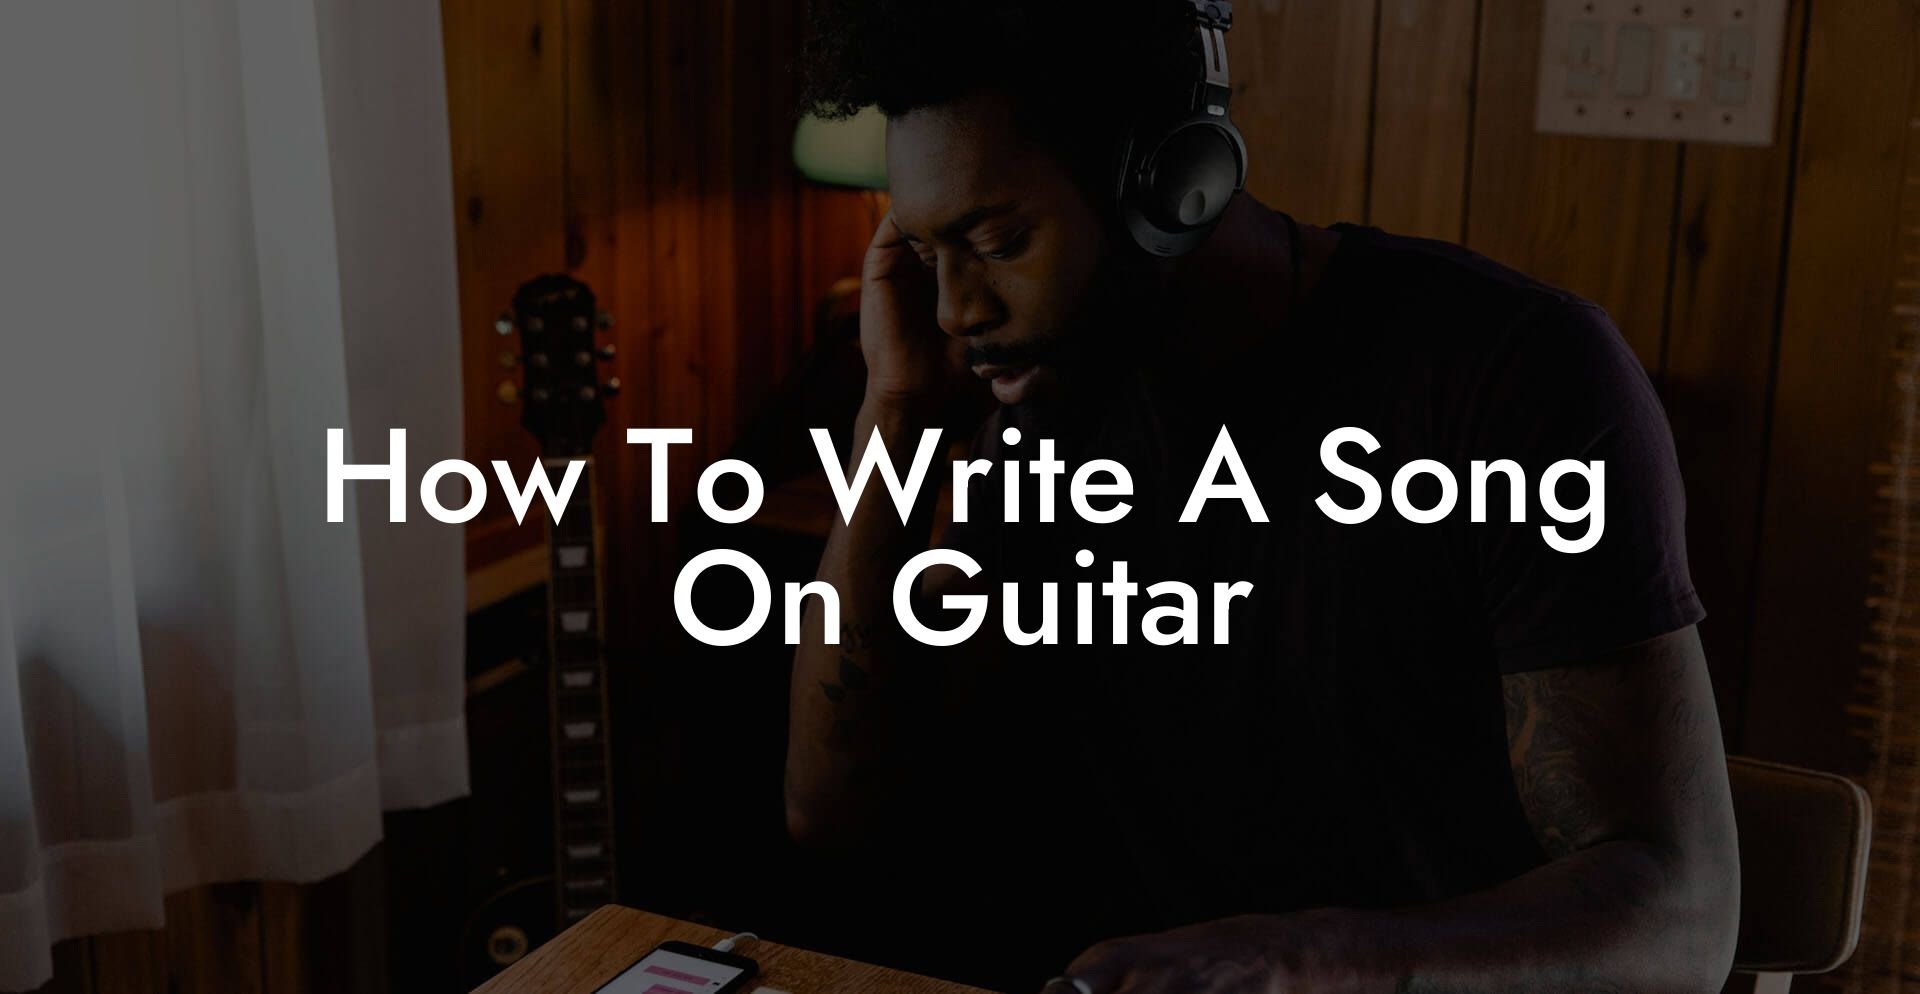 how to write a song on guitar lyric assistant